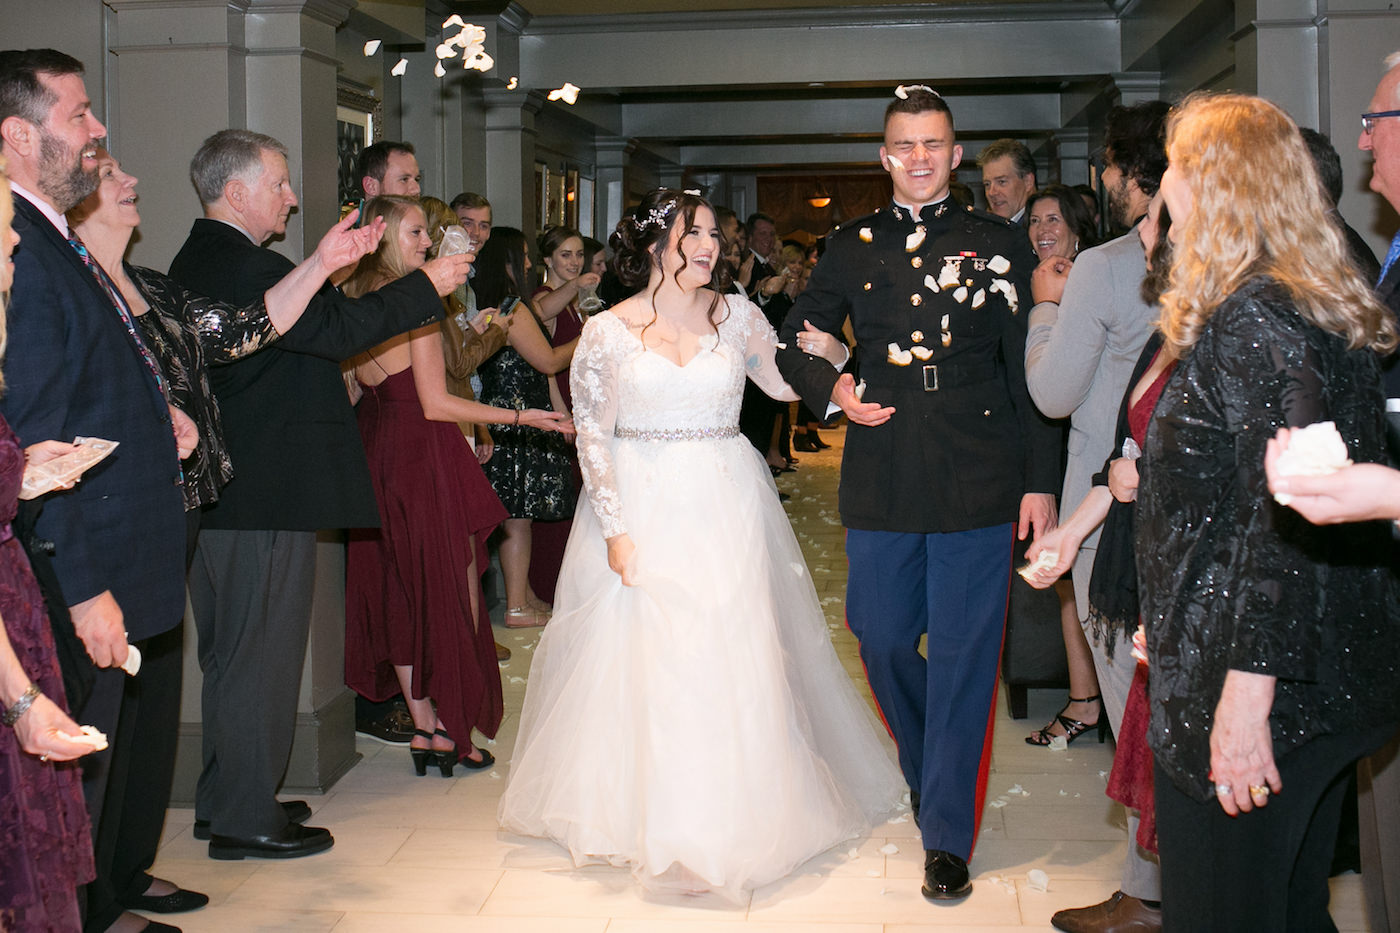 Classic Bride and Military Groom Sparkler Wedding Reception Exit Portrait | Wedding Photographer Carrie Wildes Photography